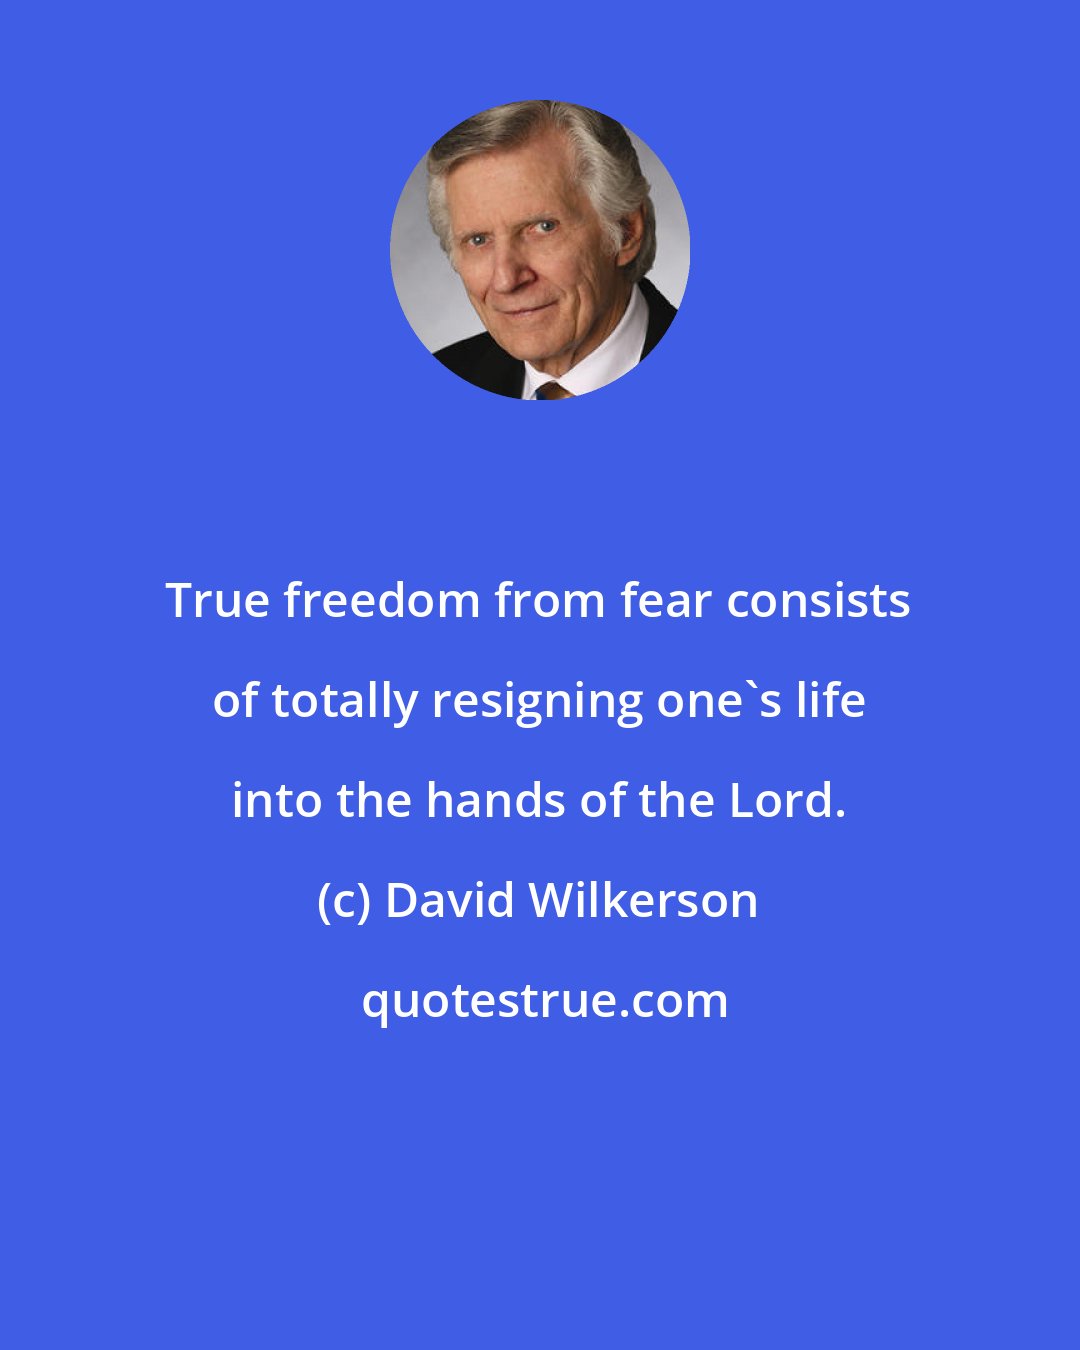 David Wilkerson: True freedom from fear consists of totally resigning one's life into the hands of the Lord.